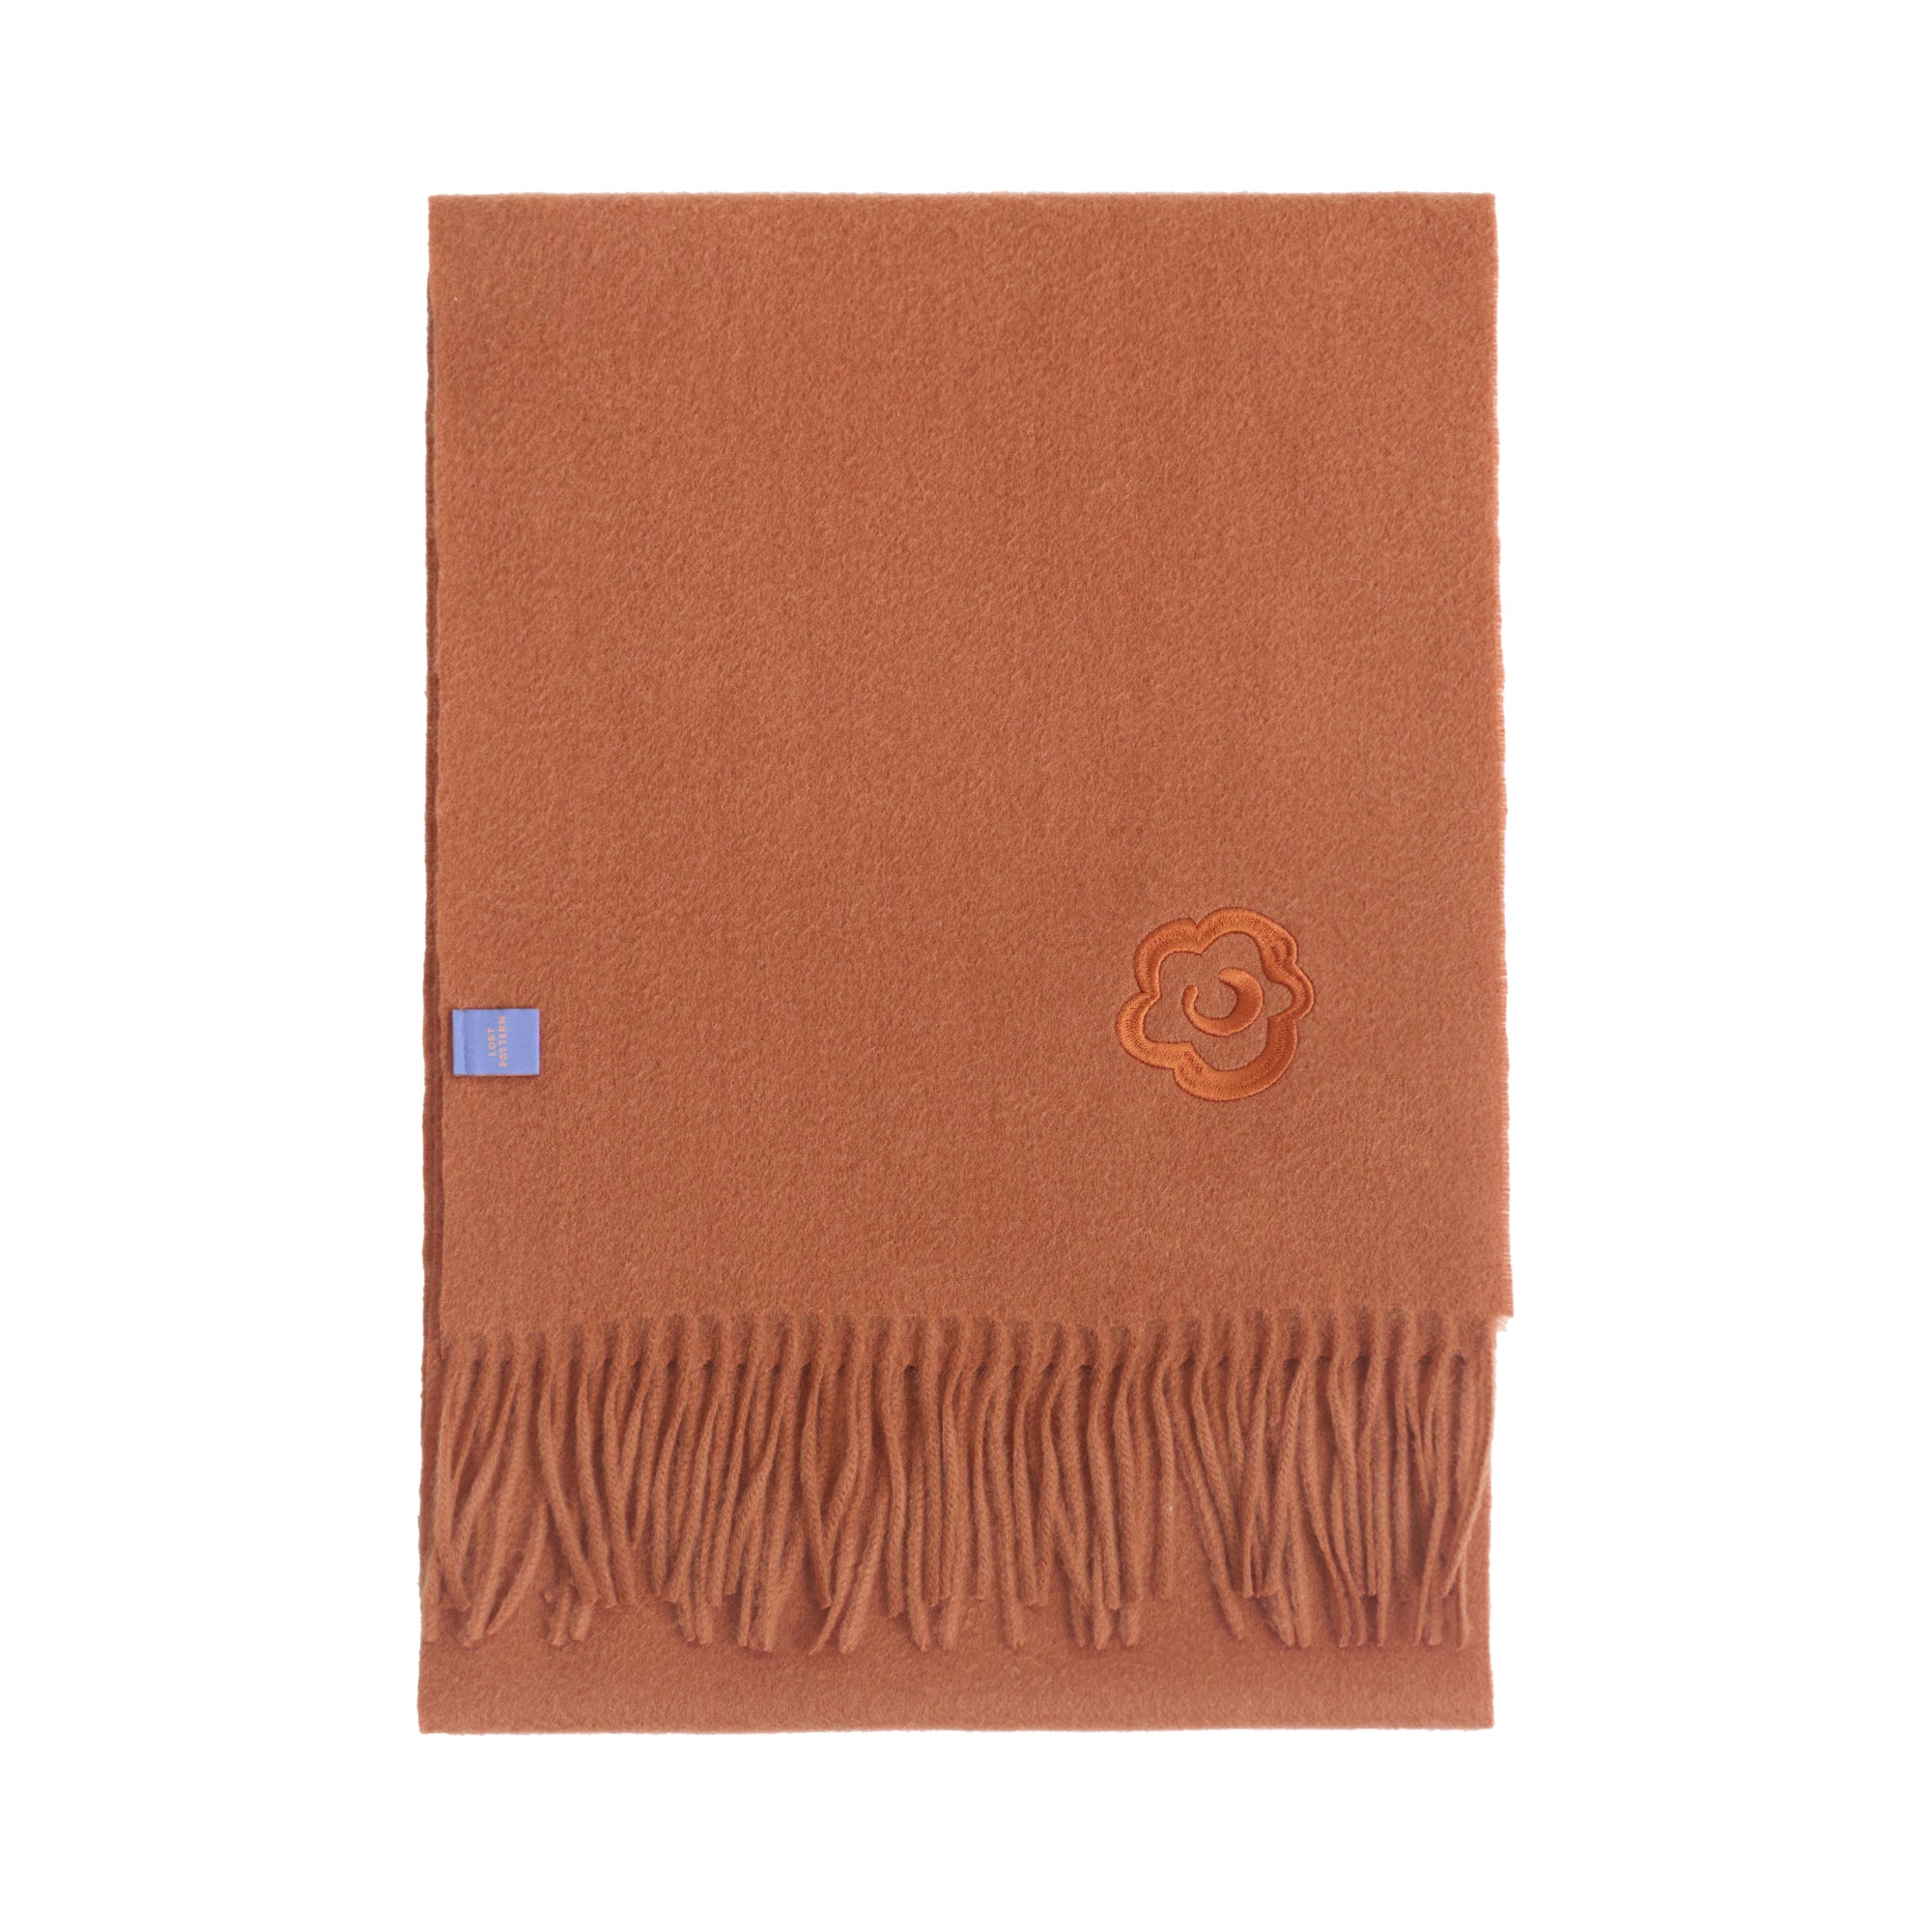 "Lost in Warmth" Classic Cashmere Scarf - Caramel - Caramel - LOST PATTERN Cashmere